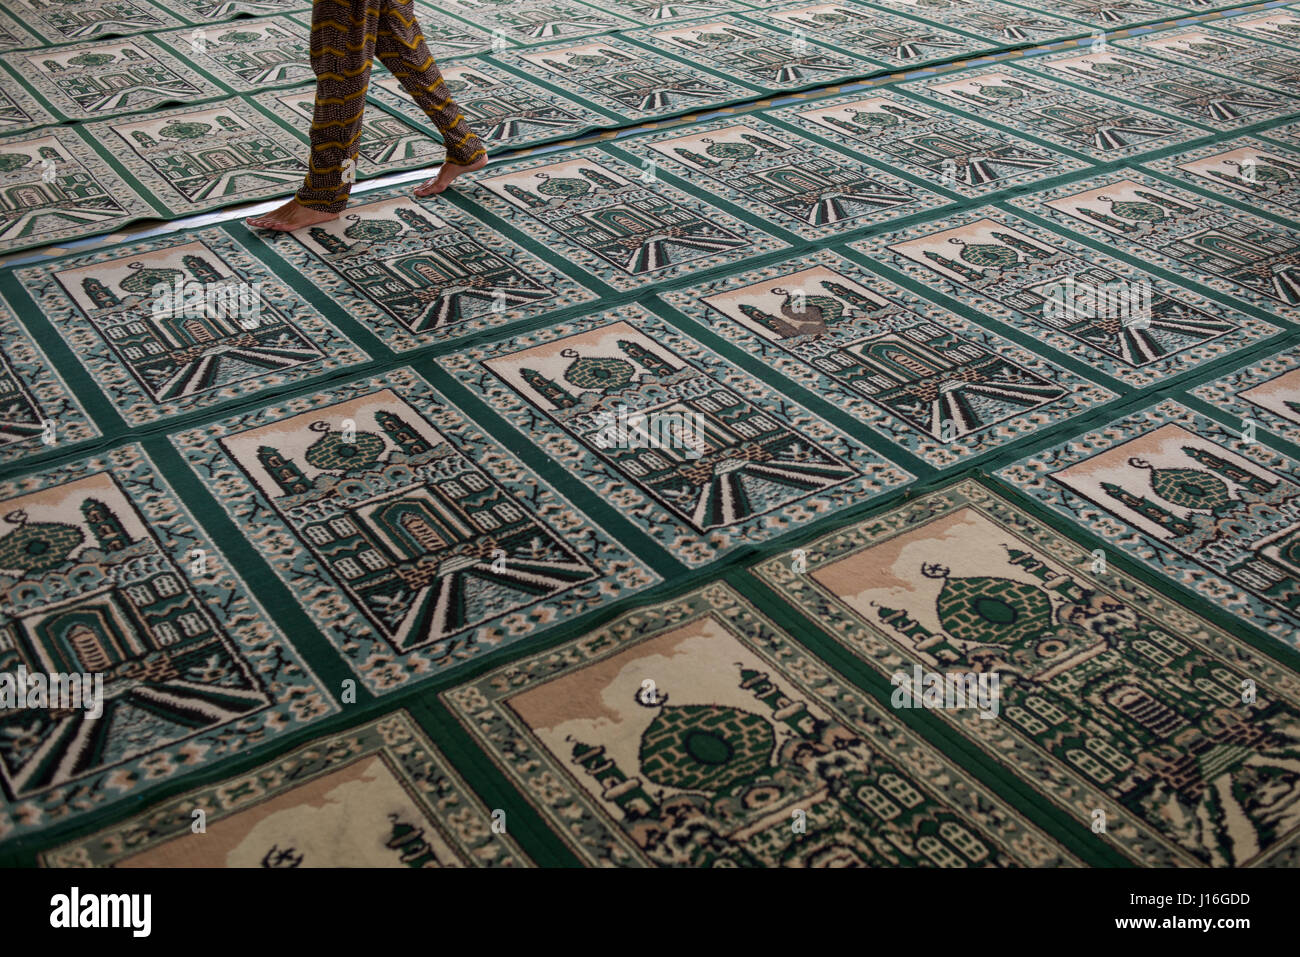 A Person Walking On Top Of Muslim Praying Carpet Inside The Grand Mosque, Medan, Sumatra, Indonesia Stock Photo